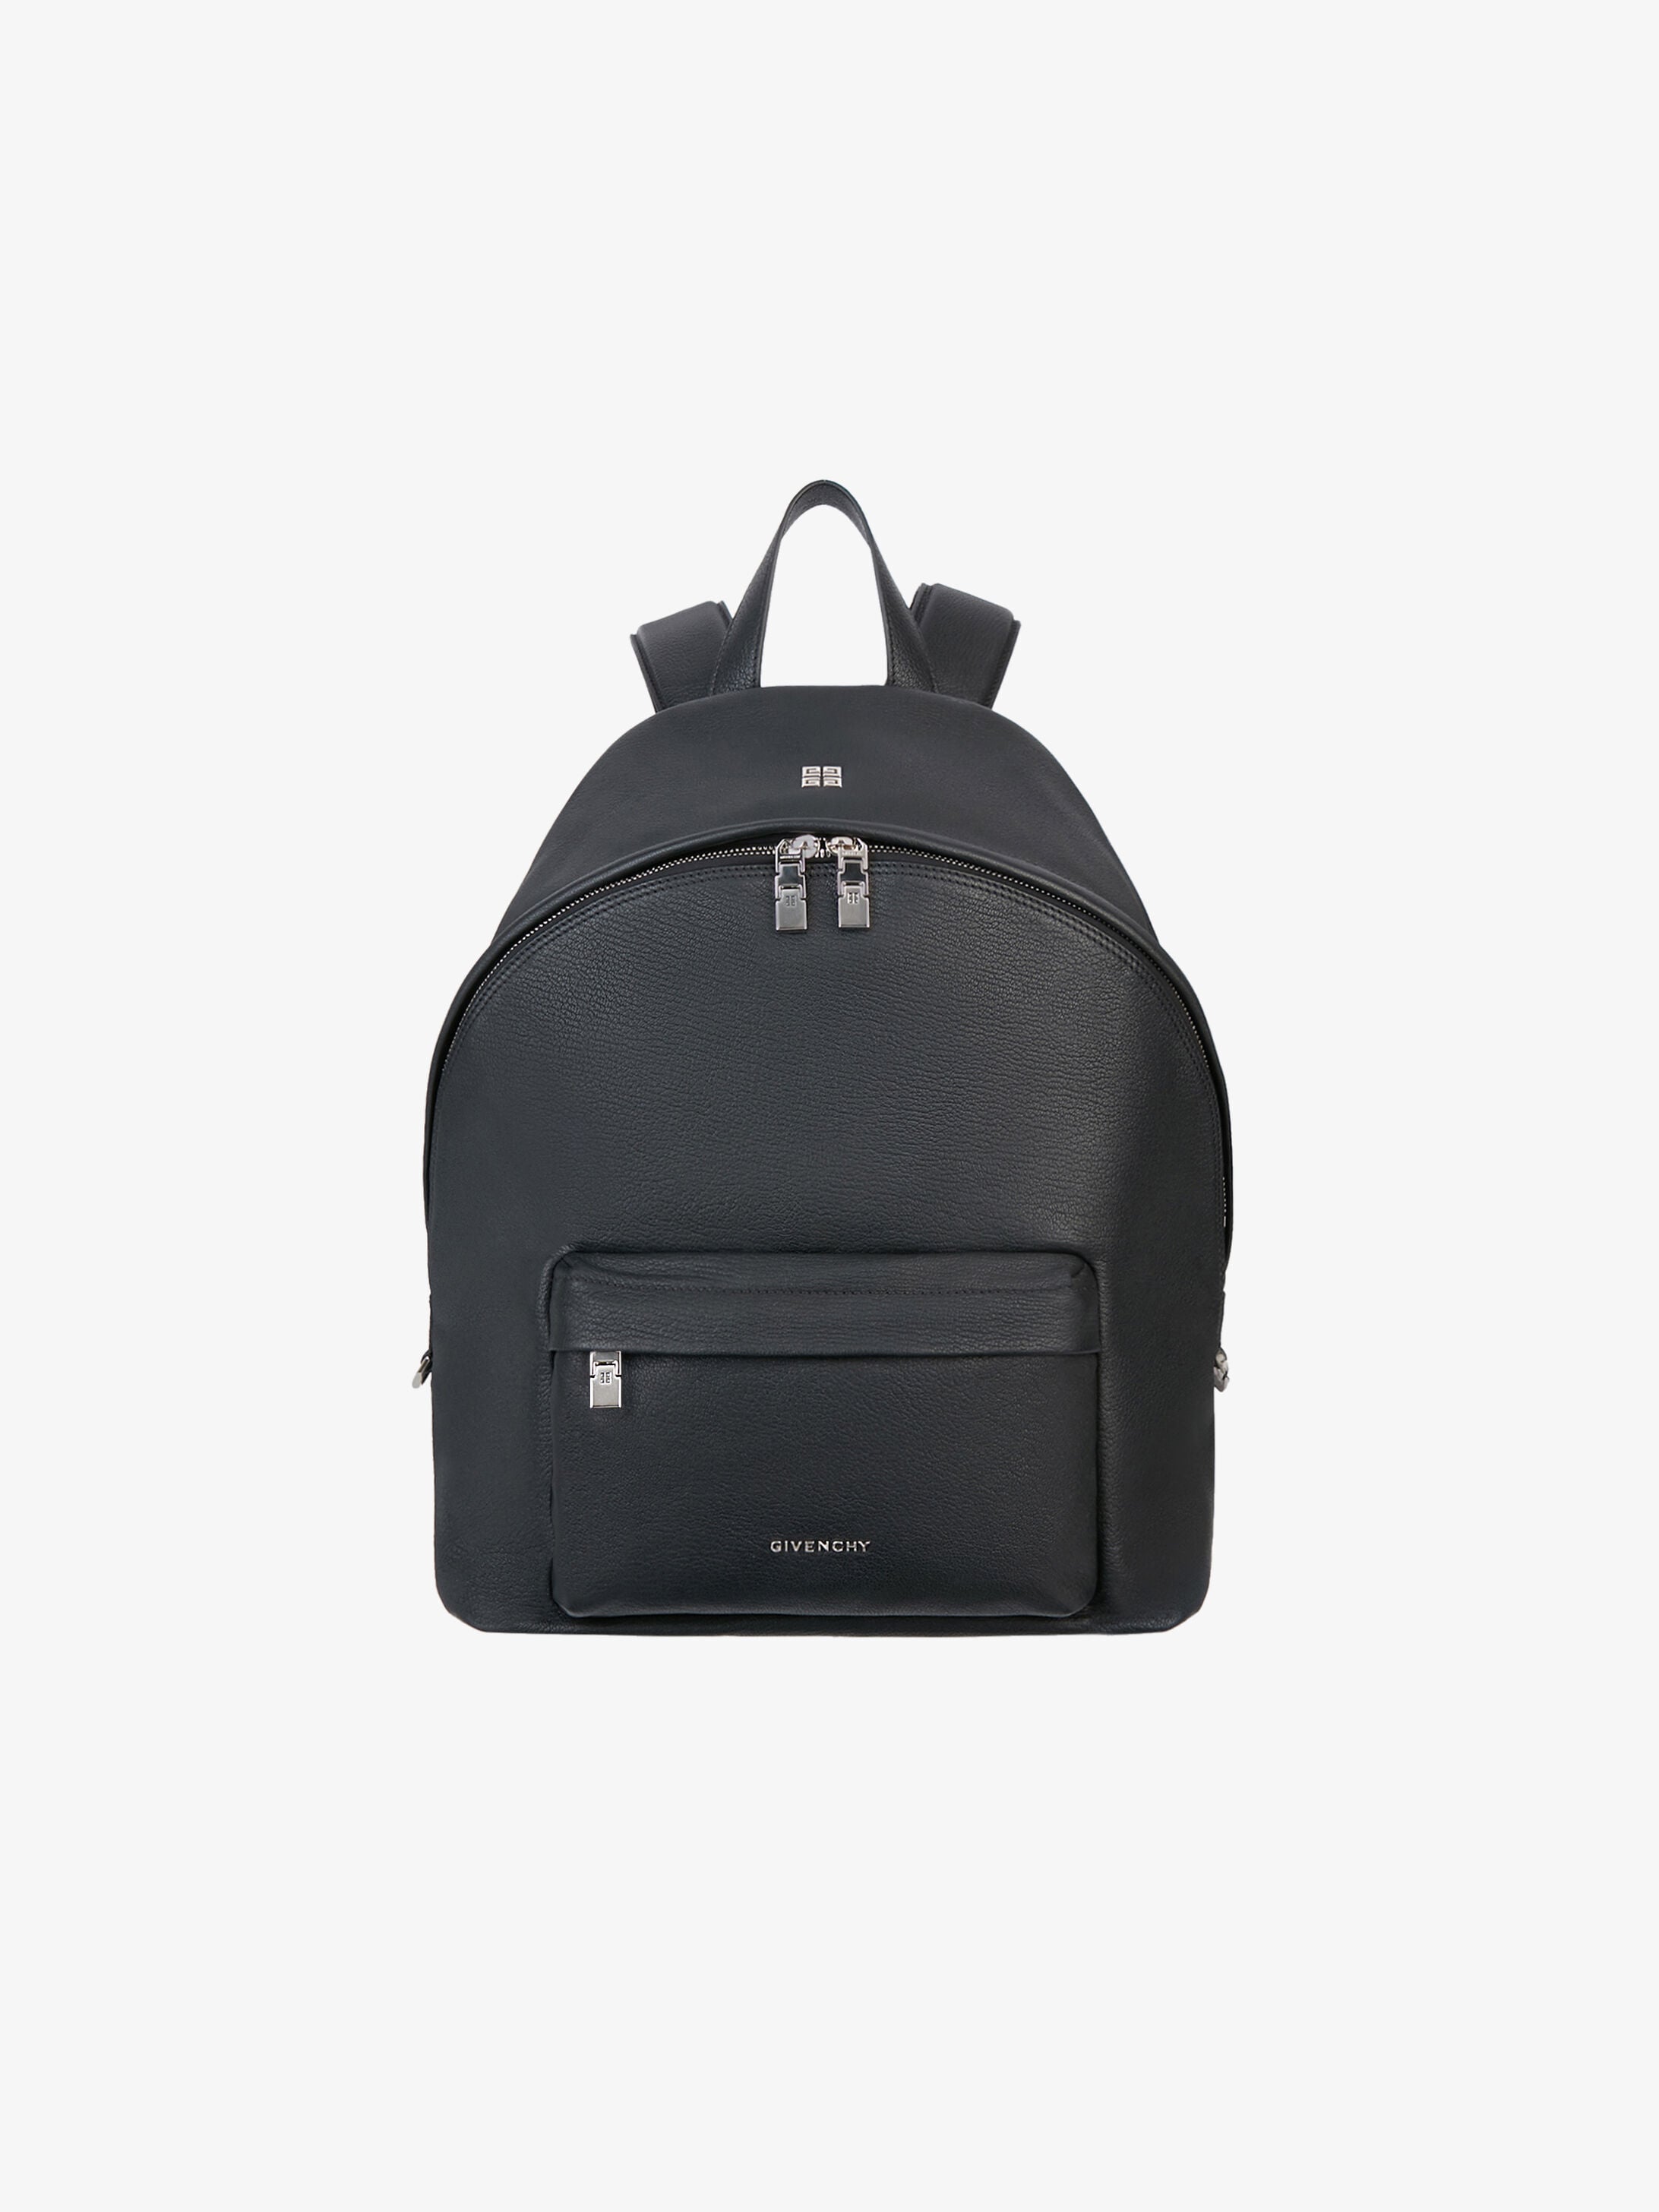 givenchy backpack price